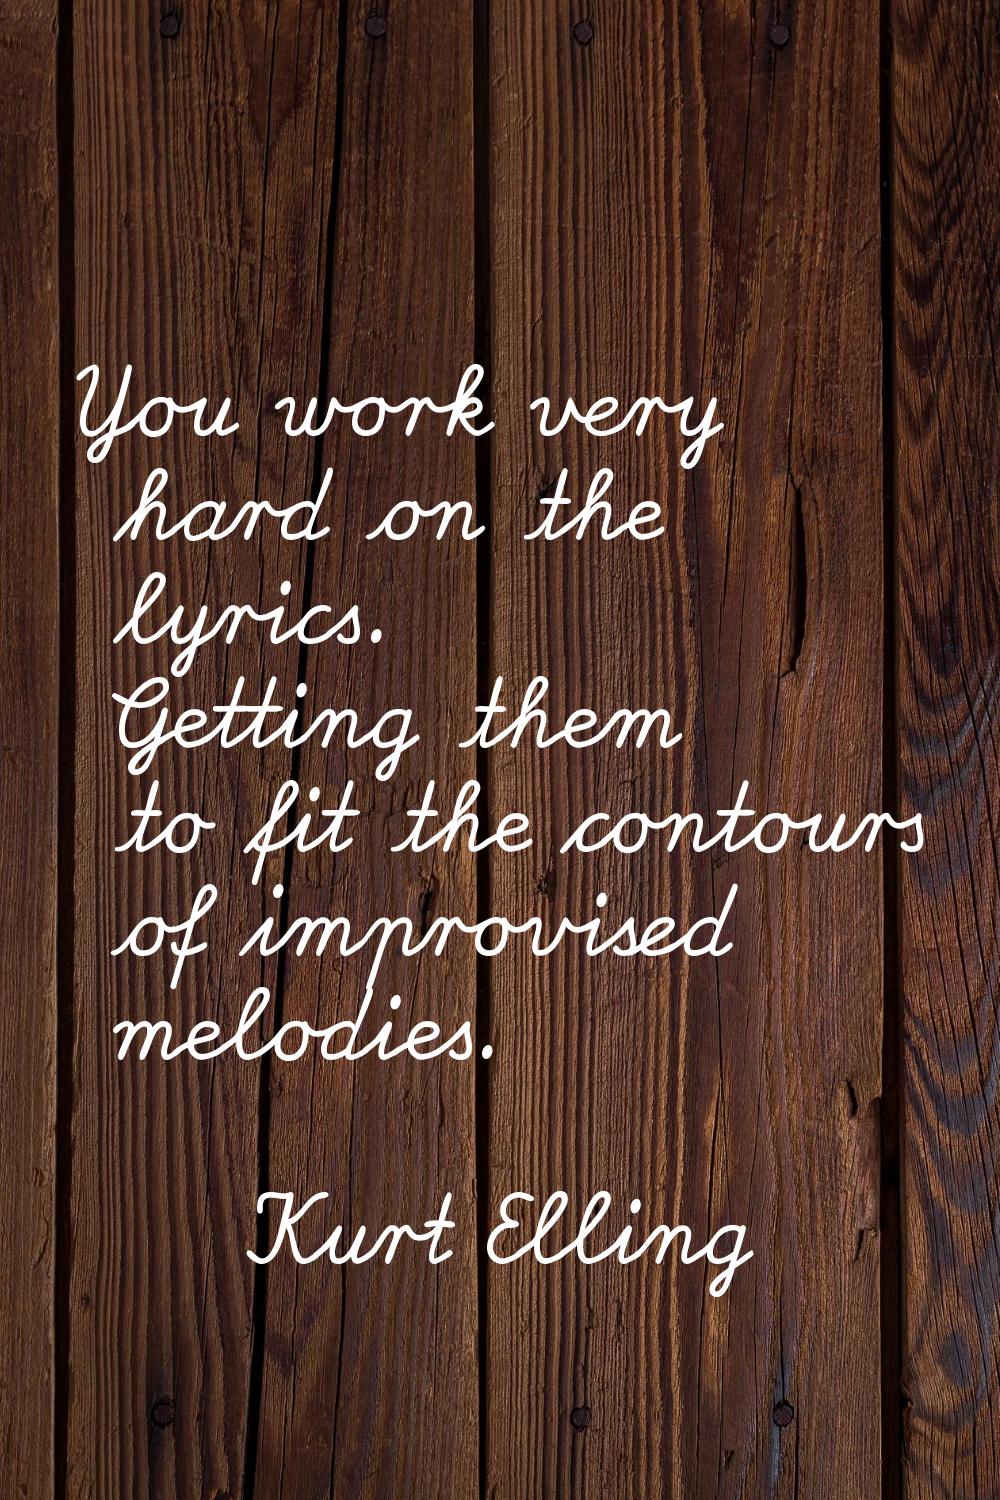 You work very hard on the lyrics. Getting them to fit the contours of improvised melodies.